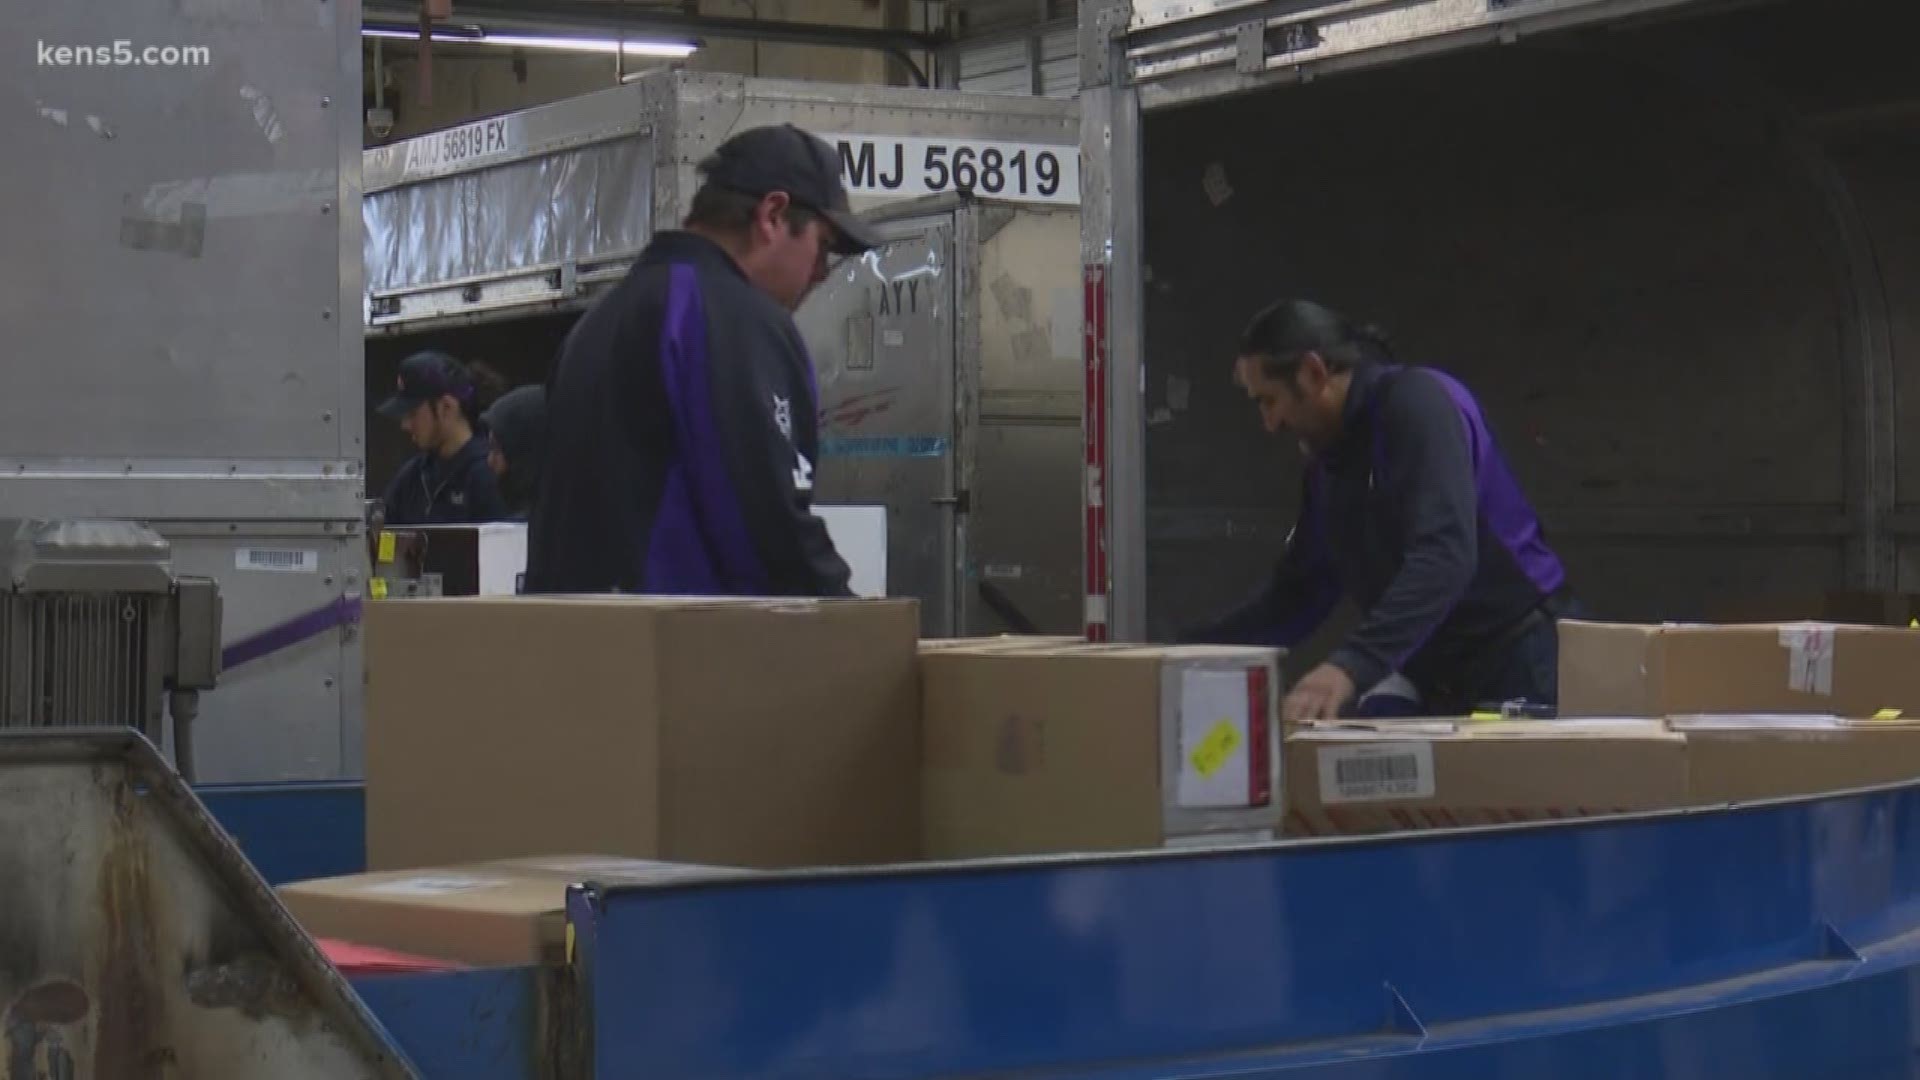 It's the time of year for packages, and shipping centers are seeing a spike in items ahead of the holiday.